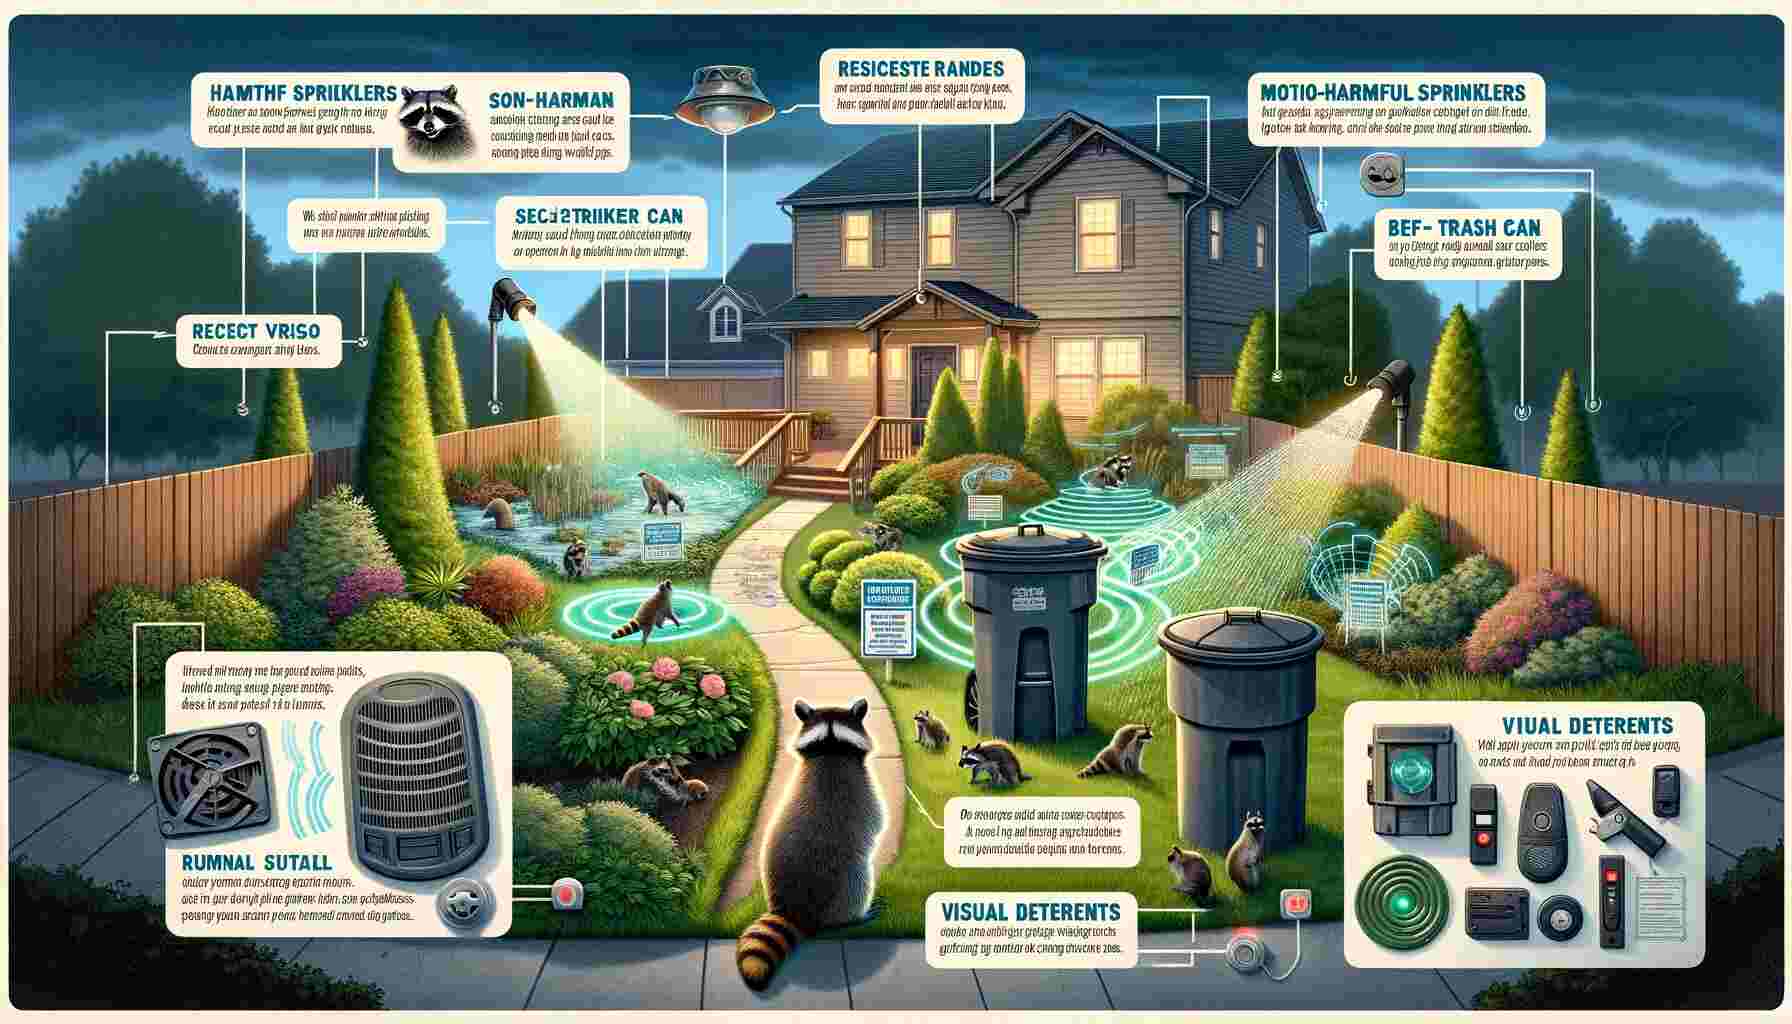 The image illustrates various alternative methods to keep raccoons away from a residential area, including motion-activated sprinklers, secure trash cans, ultrasonic devices, and visual deterrents, all set against the backdrop of a suburban home.